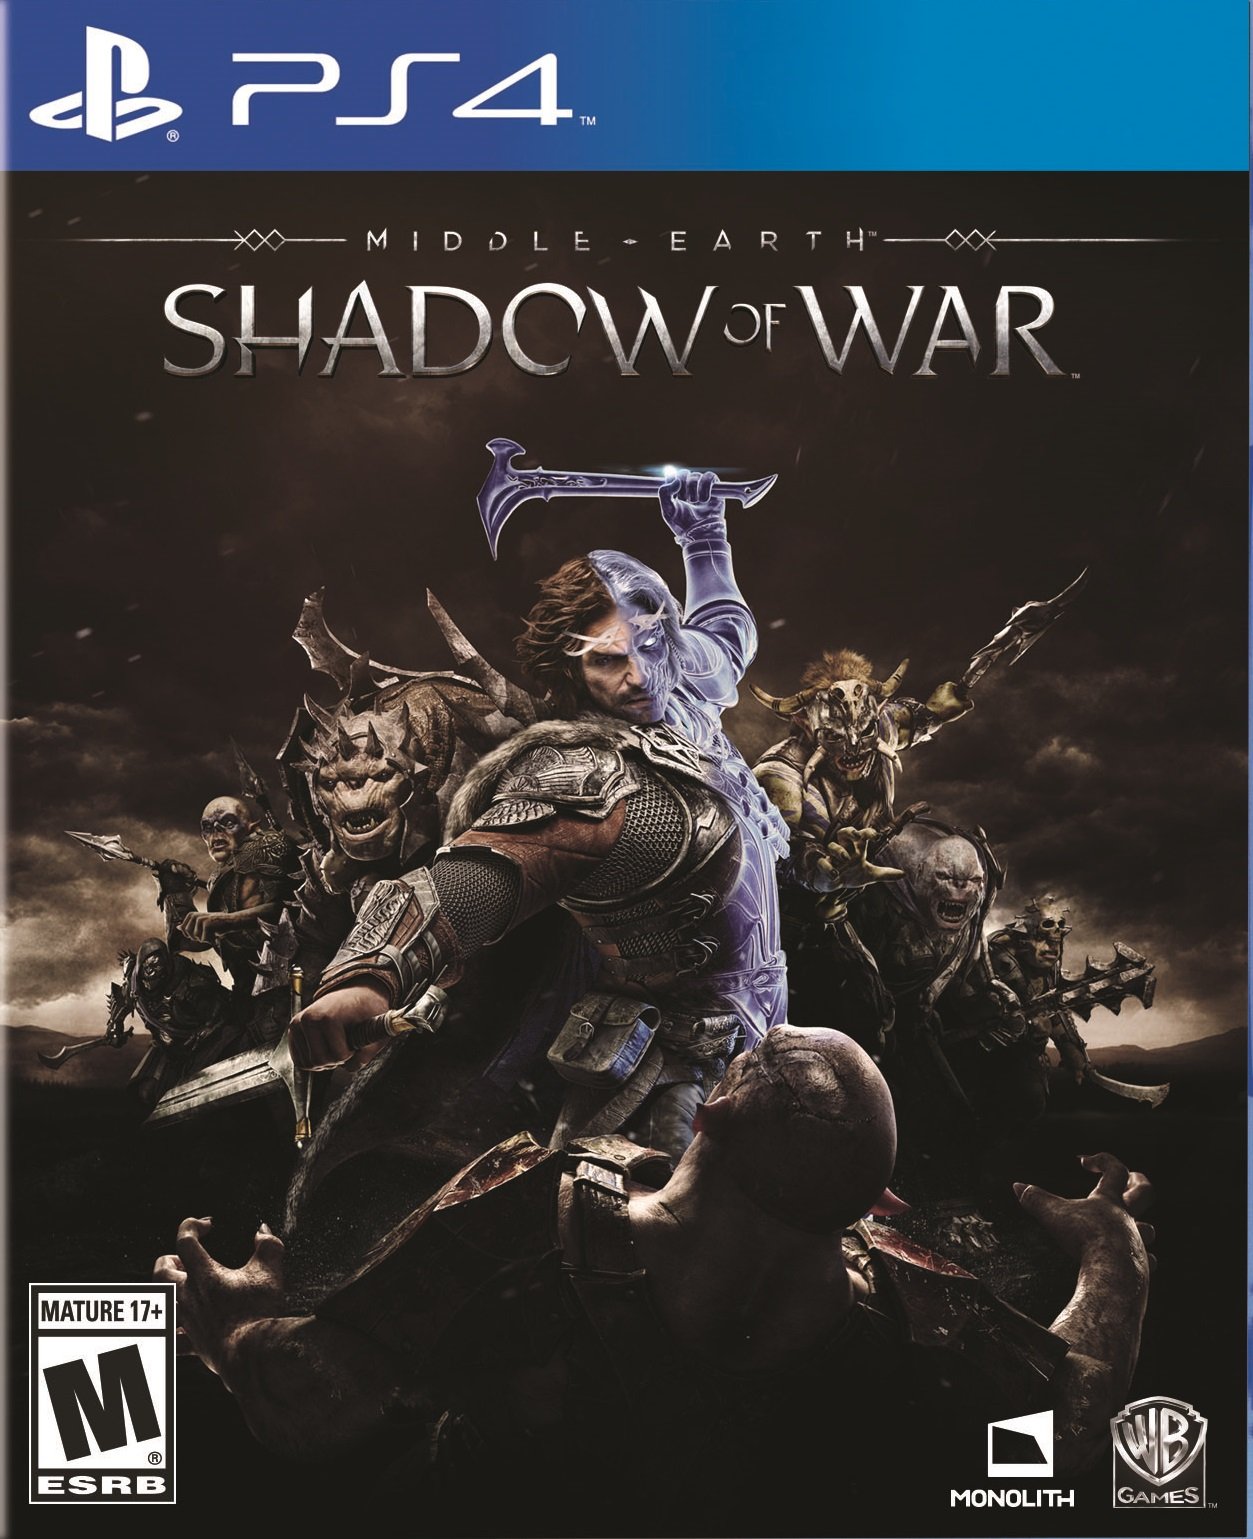 Warner Bros. Middle-Earth: Shadow of War for PlayStation 4 - image 1 of 6